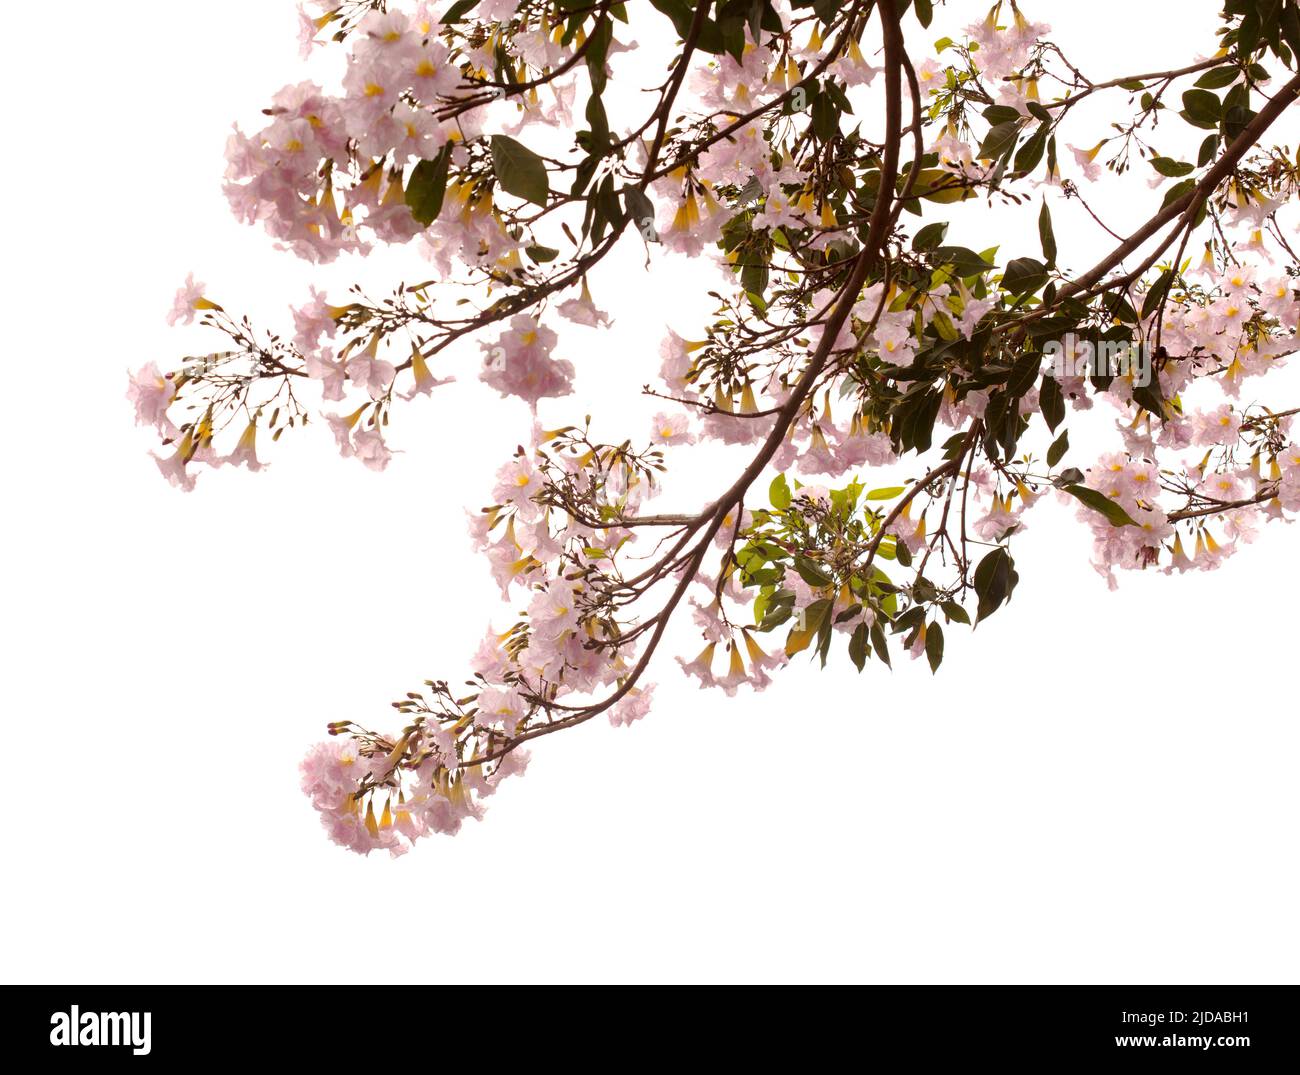 Tabebuia heterophylla, pink trumpet tree, flowering branches isolated on white background Stock Photo